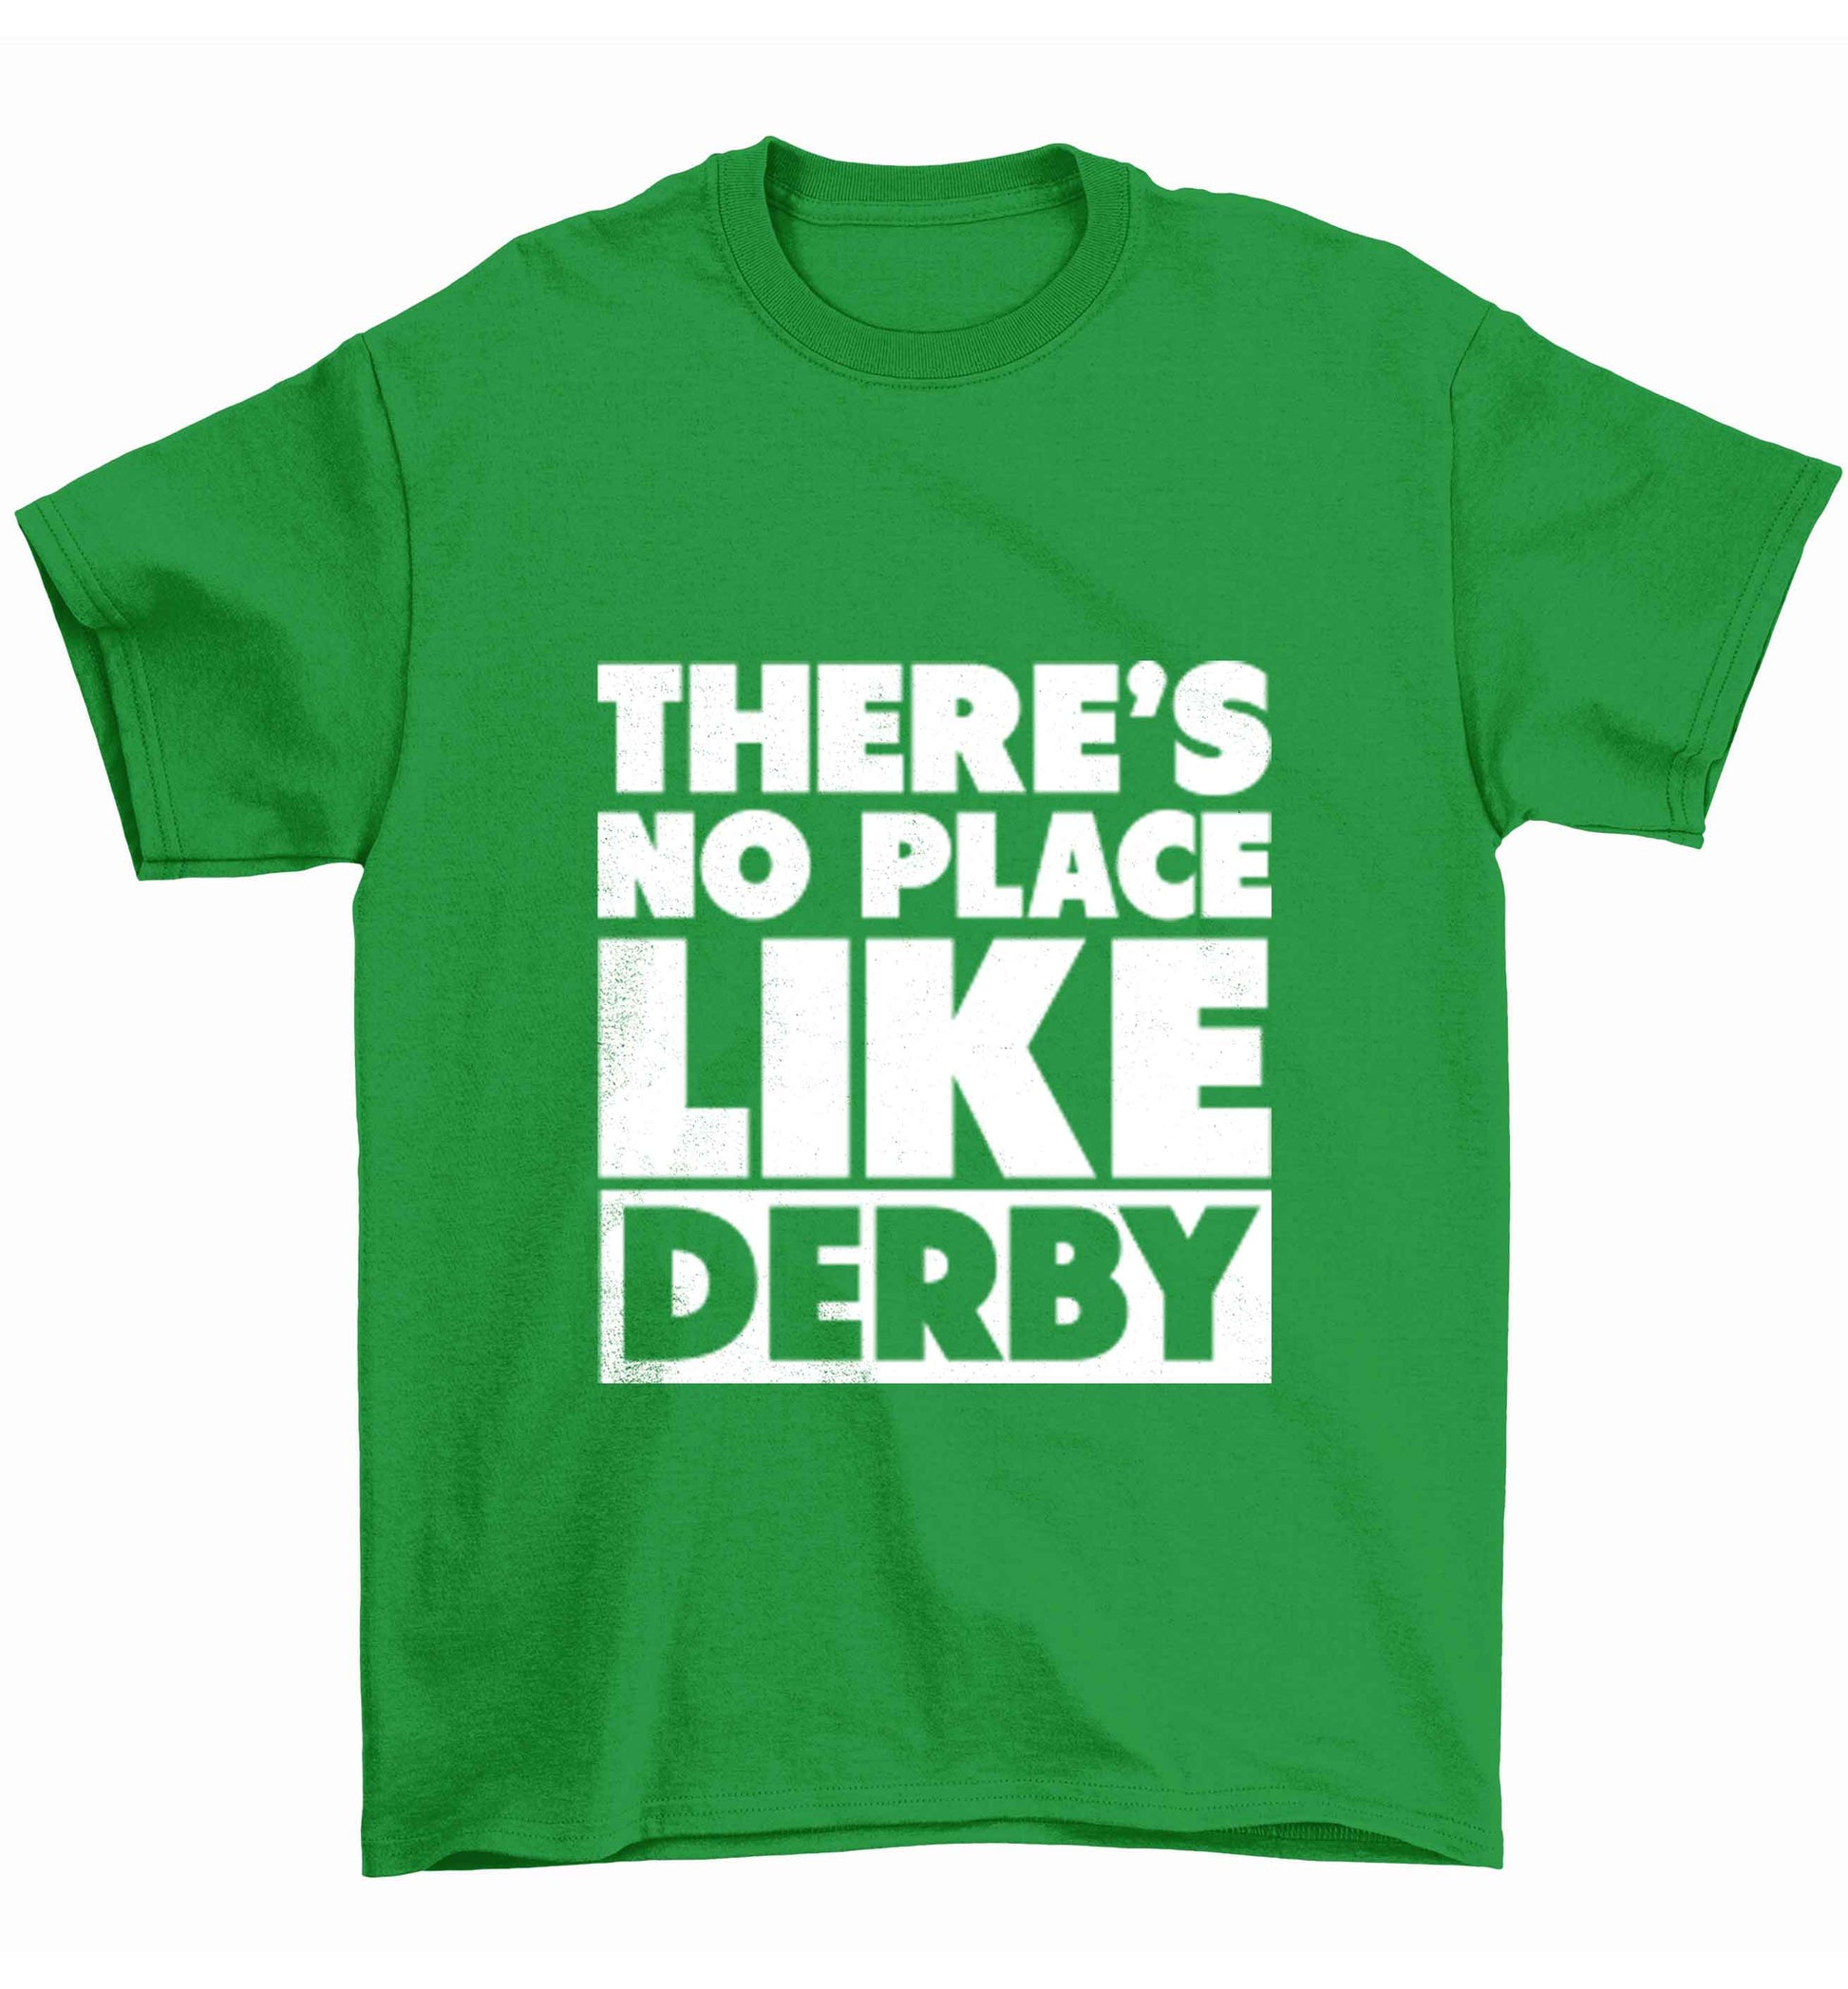 There's no place like Derby Children's green Tshirt 12-13 Years